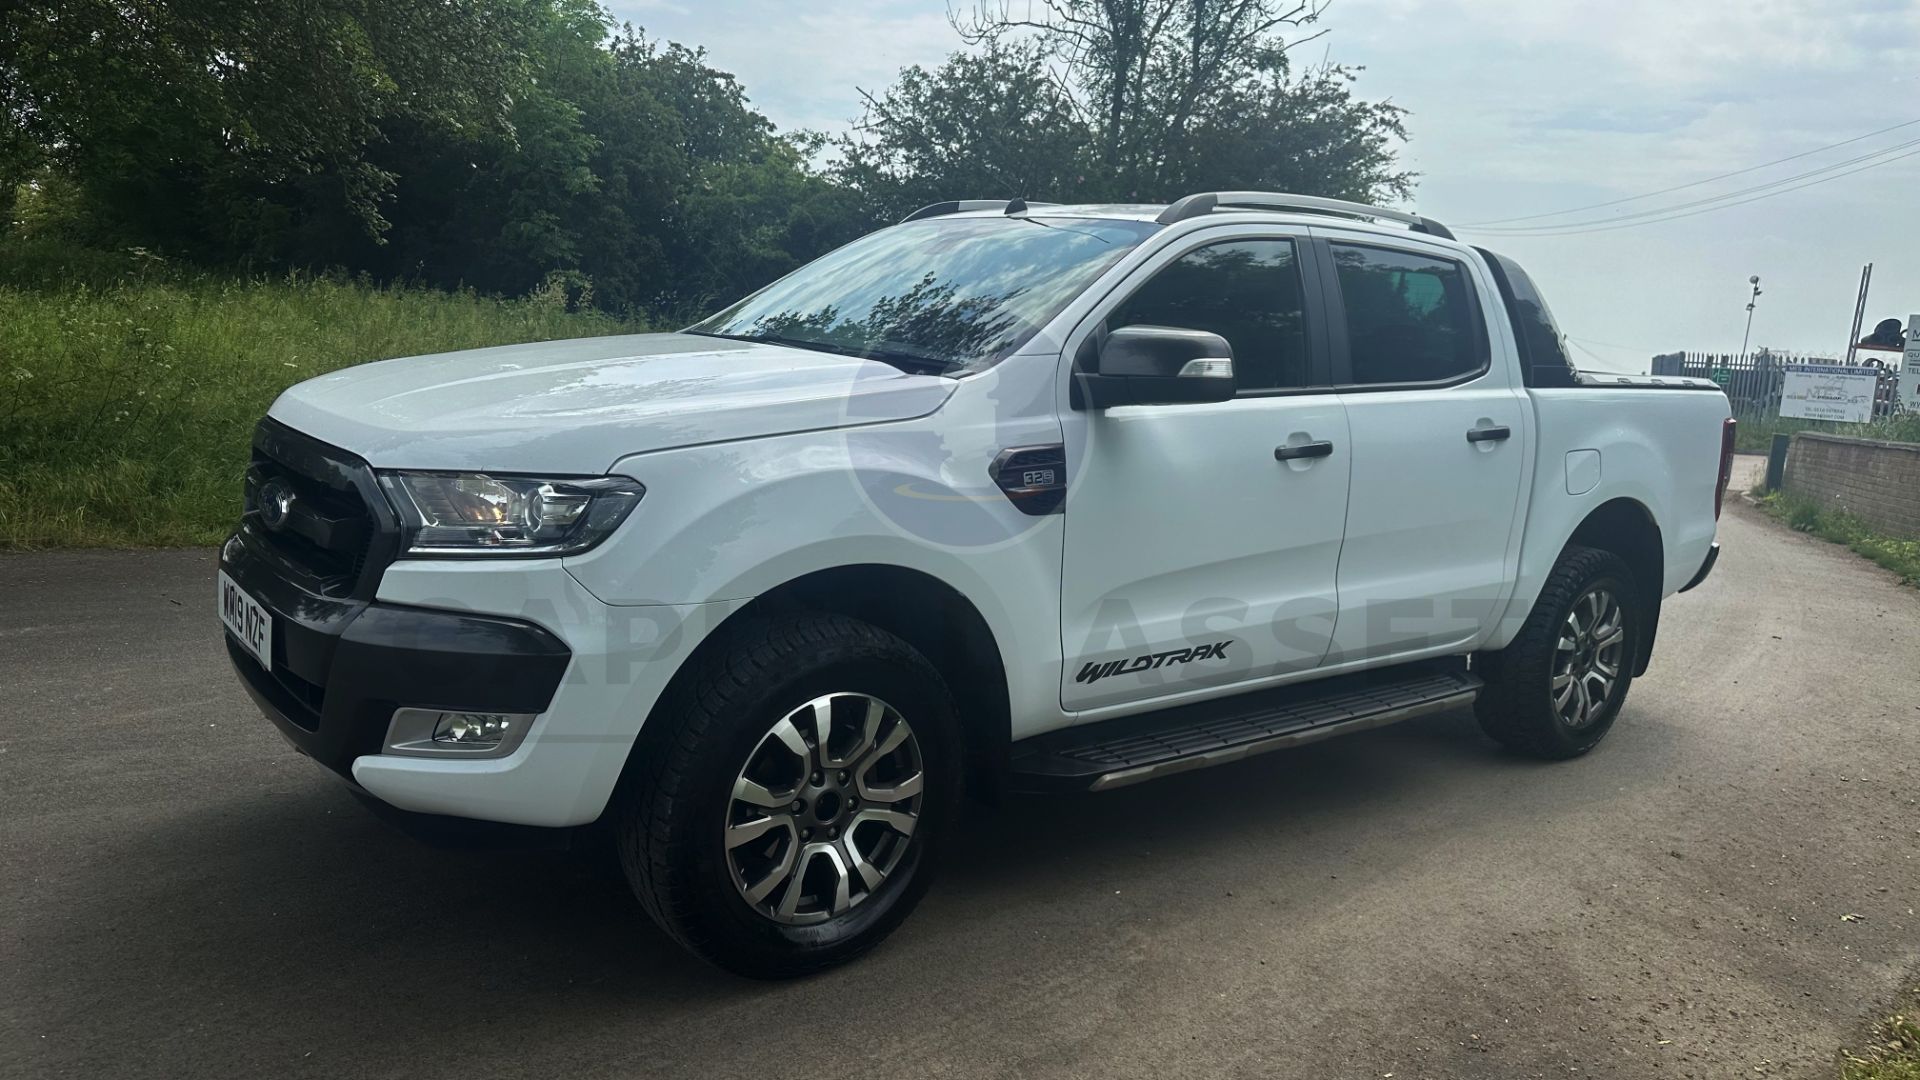 (ON SALE) FORD RANGER *WILDTRAK* DOUBLE CAB PICK-UP (2019 - EURO 6) 3.2 TDCI - AUTOMATIC (1 OWNER) - Image 6 of 50